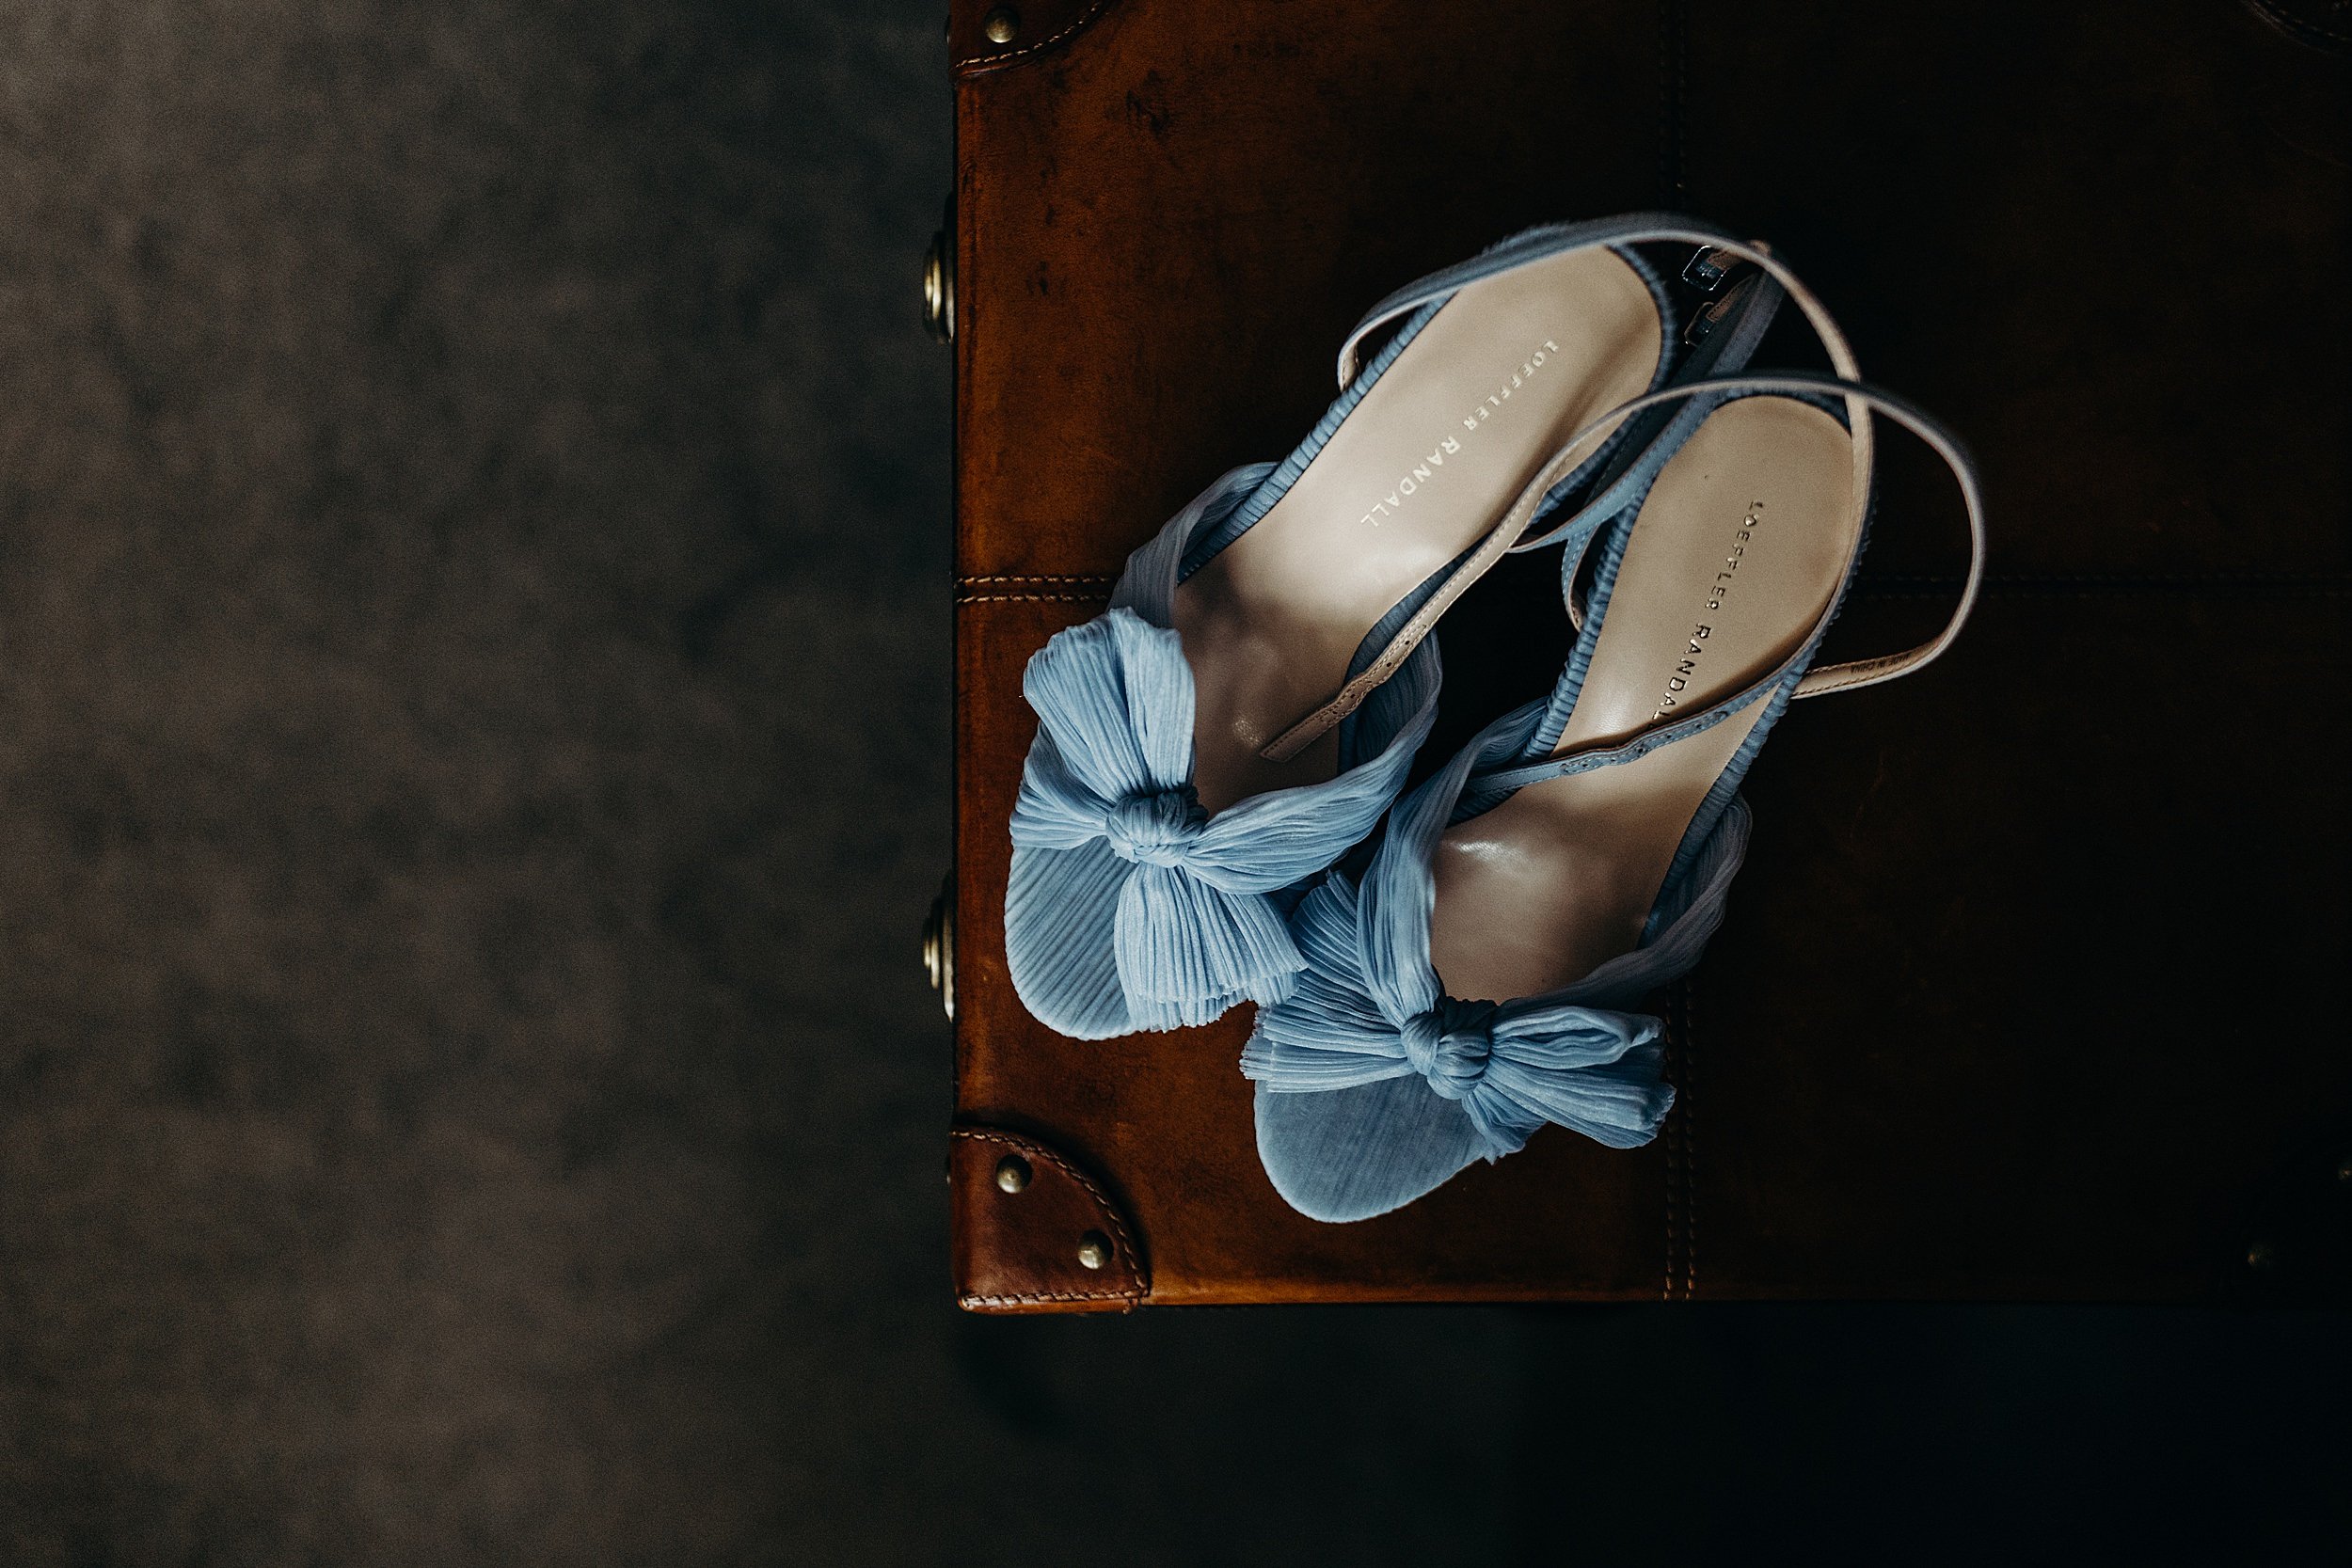 baby blue Loeffler Randall bridal shoes on top of brown suitcase during bride's preparations for the bothy glasgow wedding